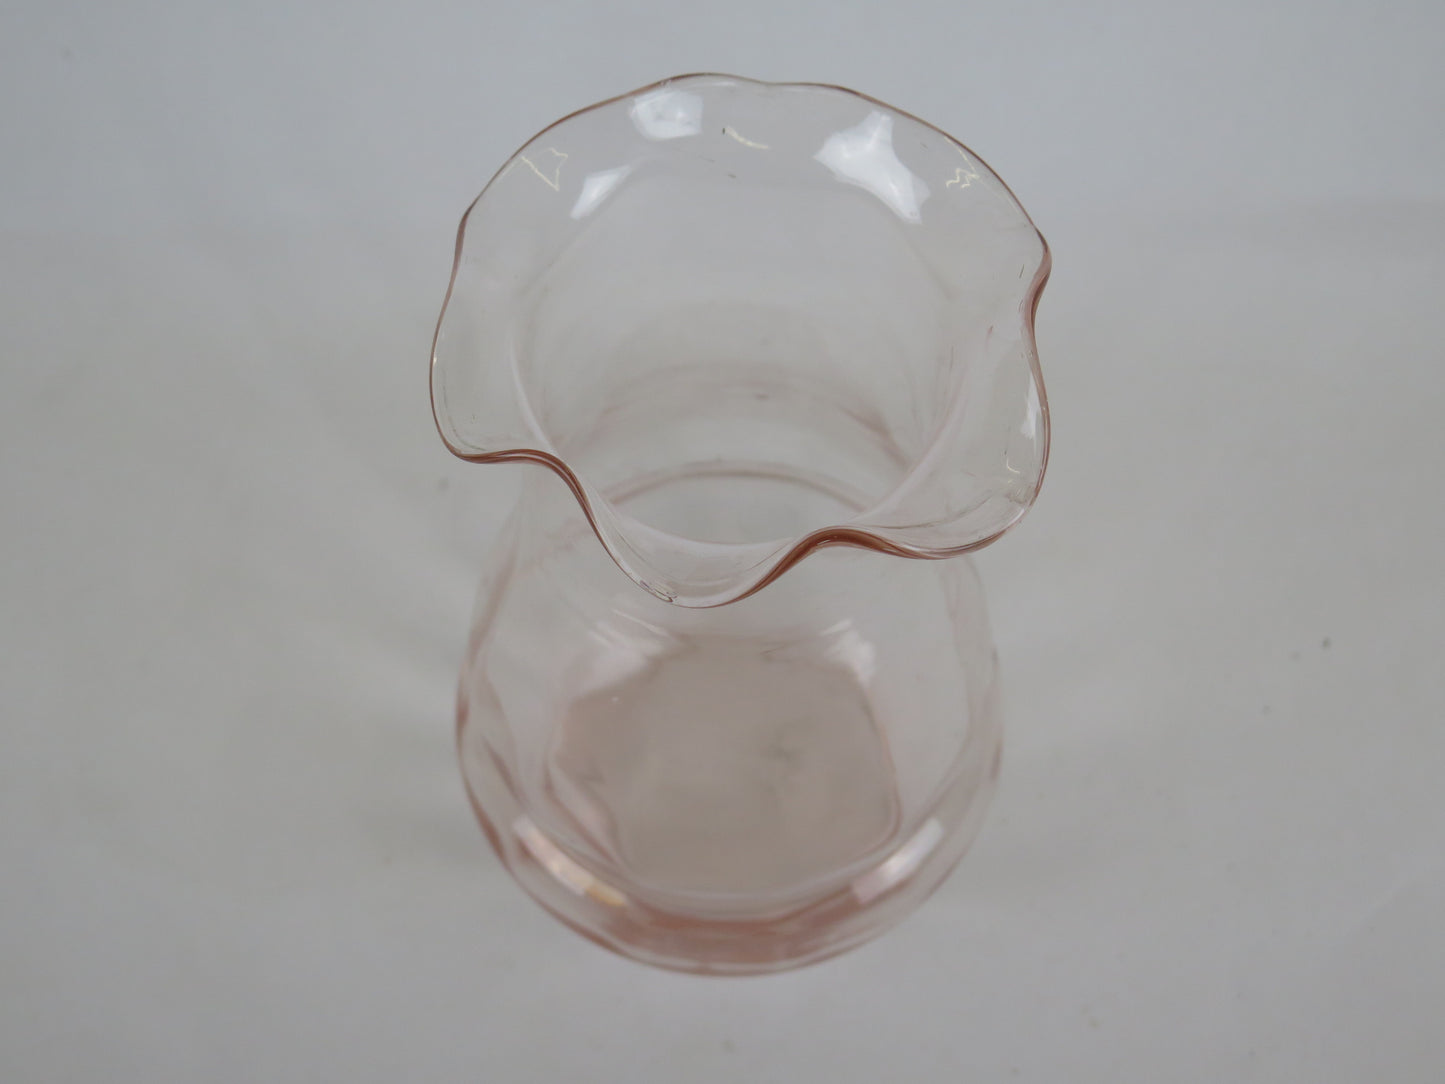 ANTIQUE BLOWN GLASS VASE WITH CHOPPED EDGE VS5